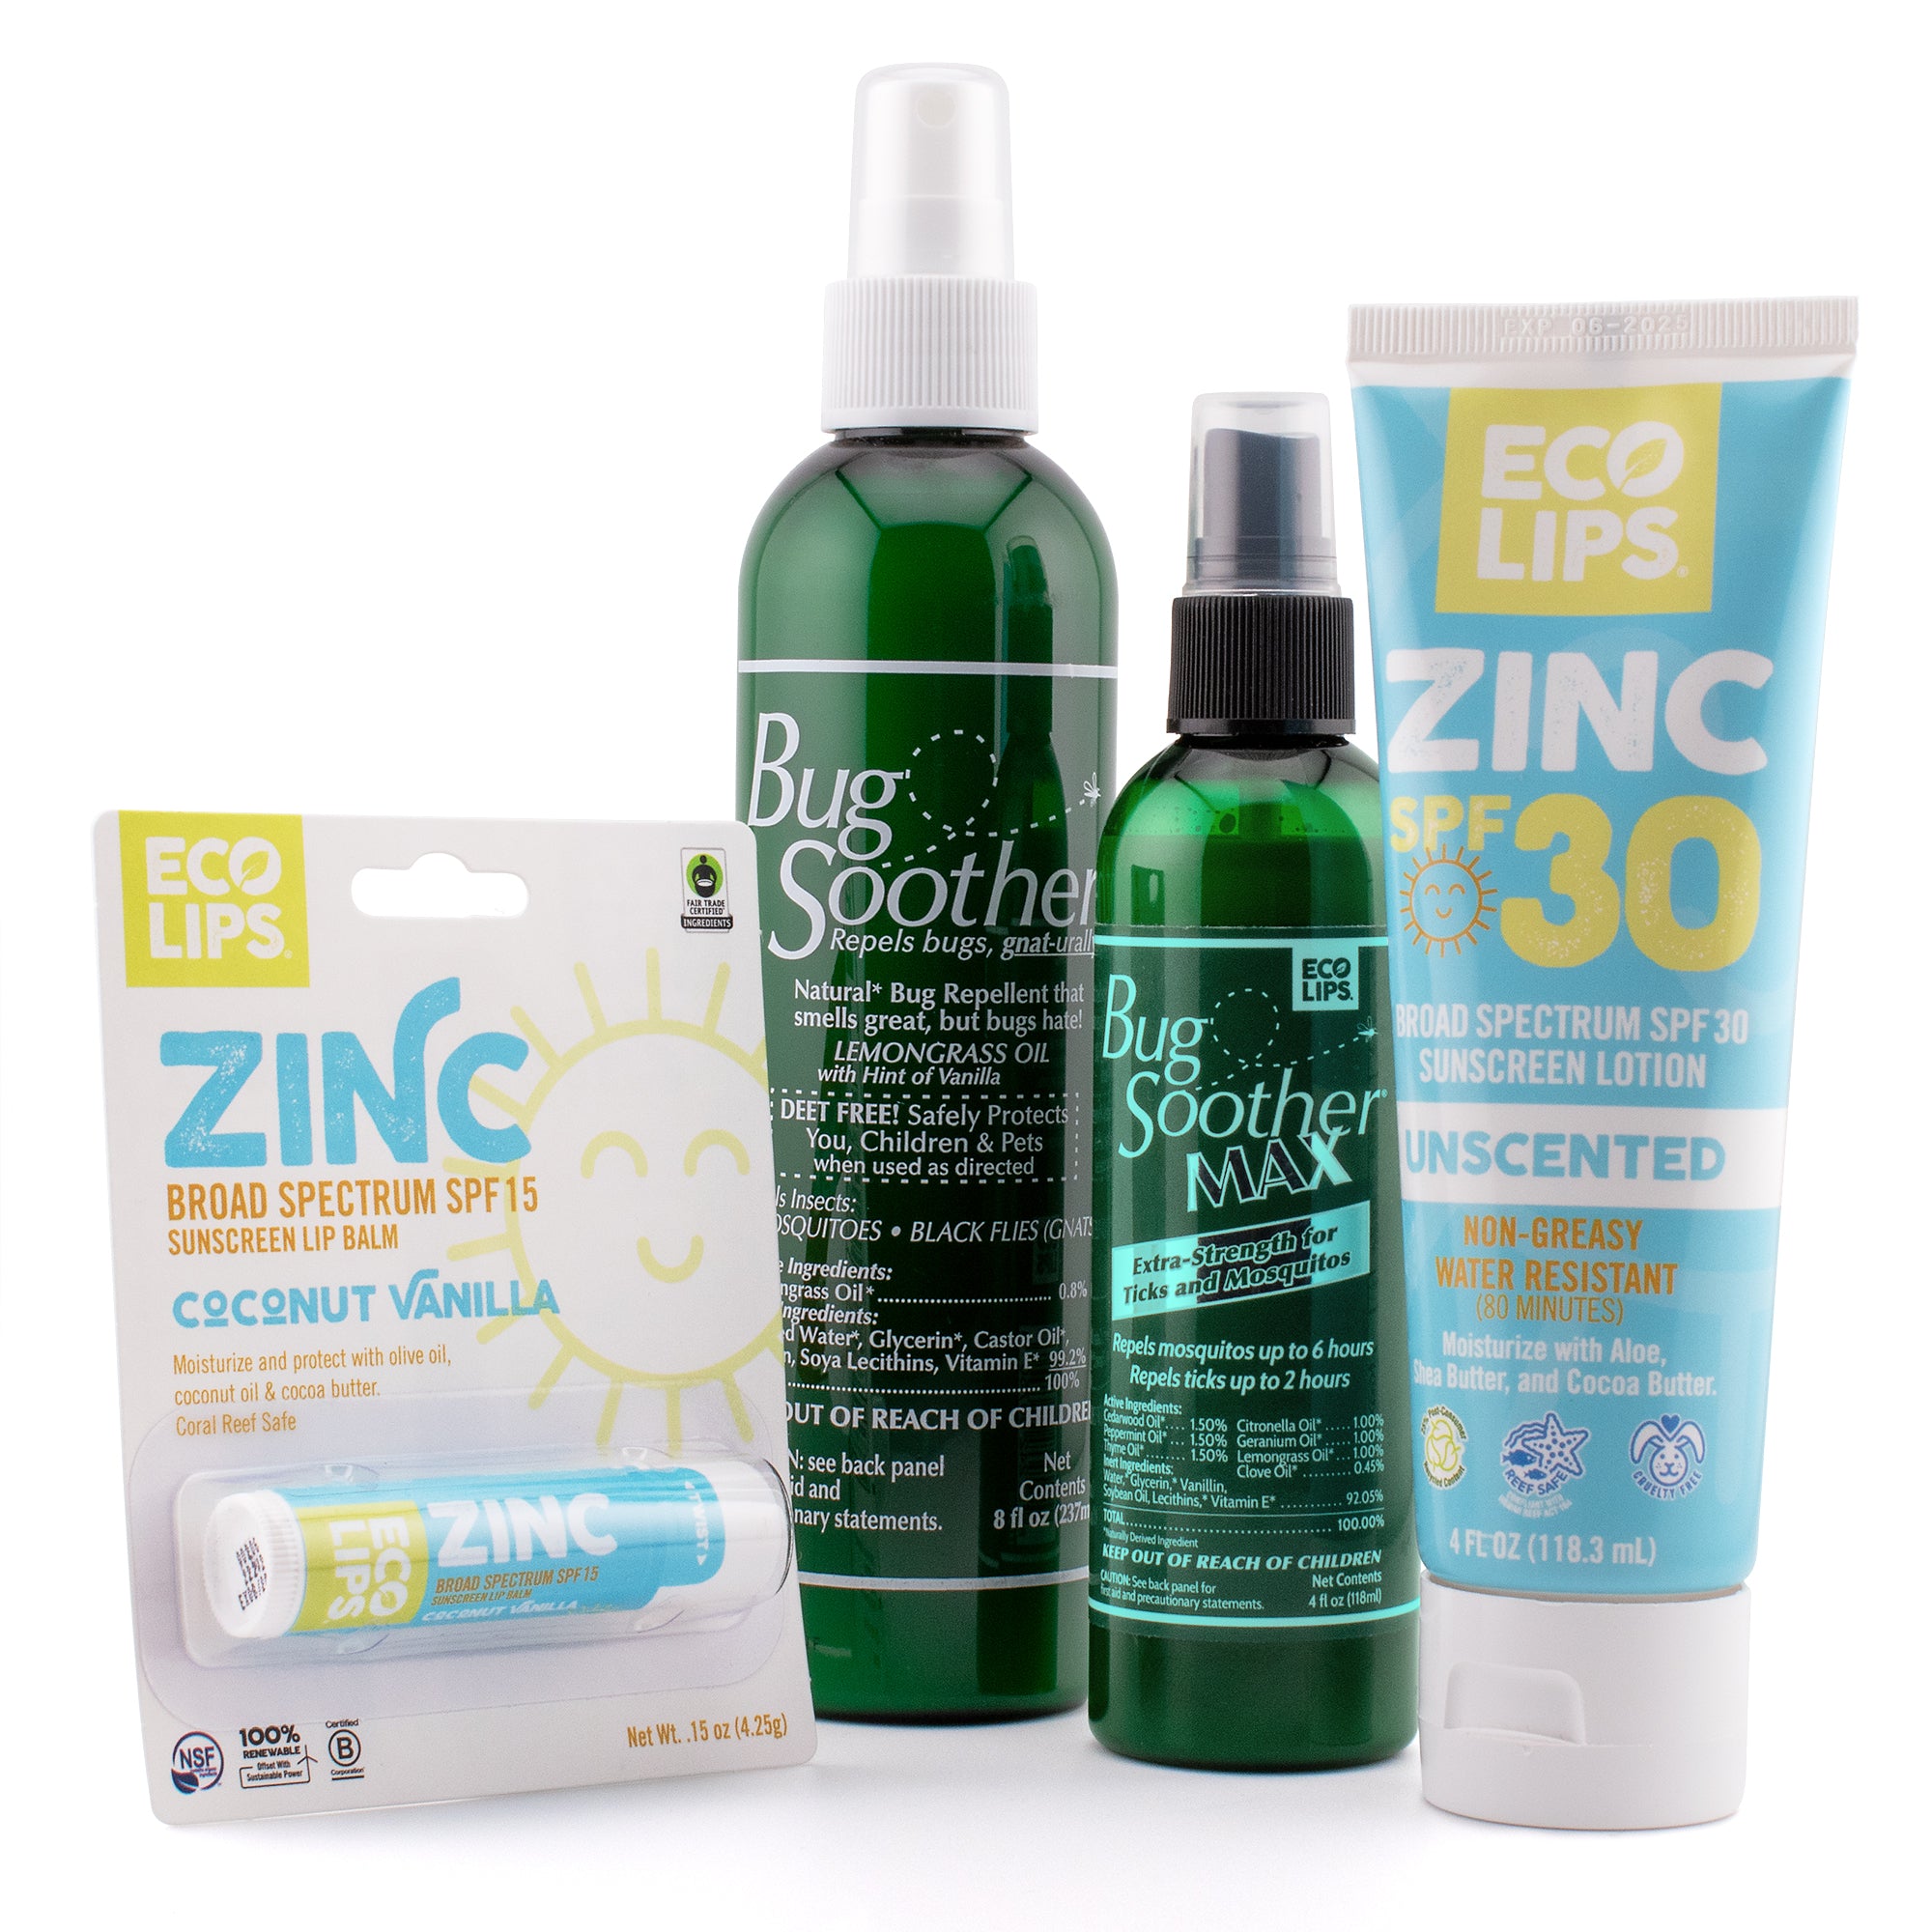 Outdoor Essentials 4-pack - Bug Soother Tick, Gnat & Mosquito Repellent, SPF 30 Sunscreen Lotion and Zinc SPF 15 Lip Balm